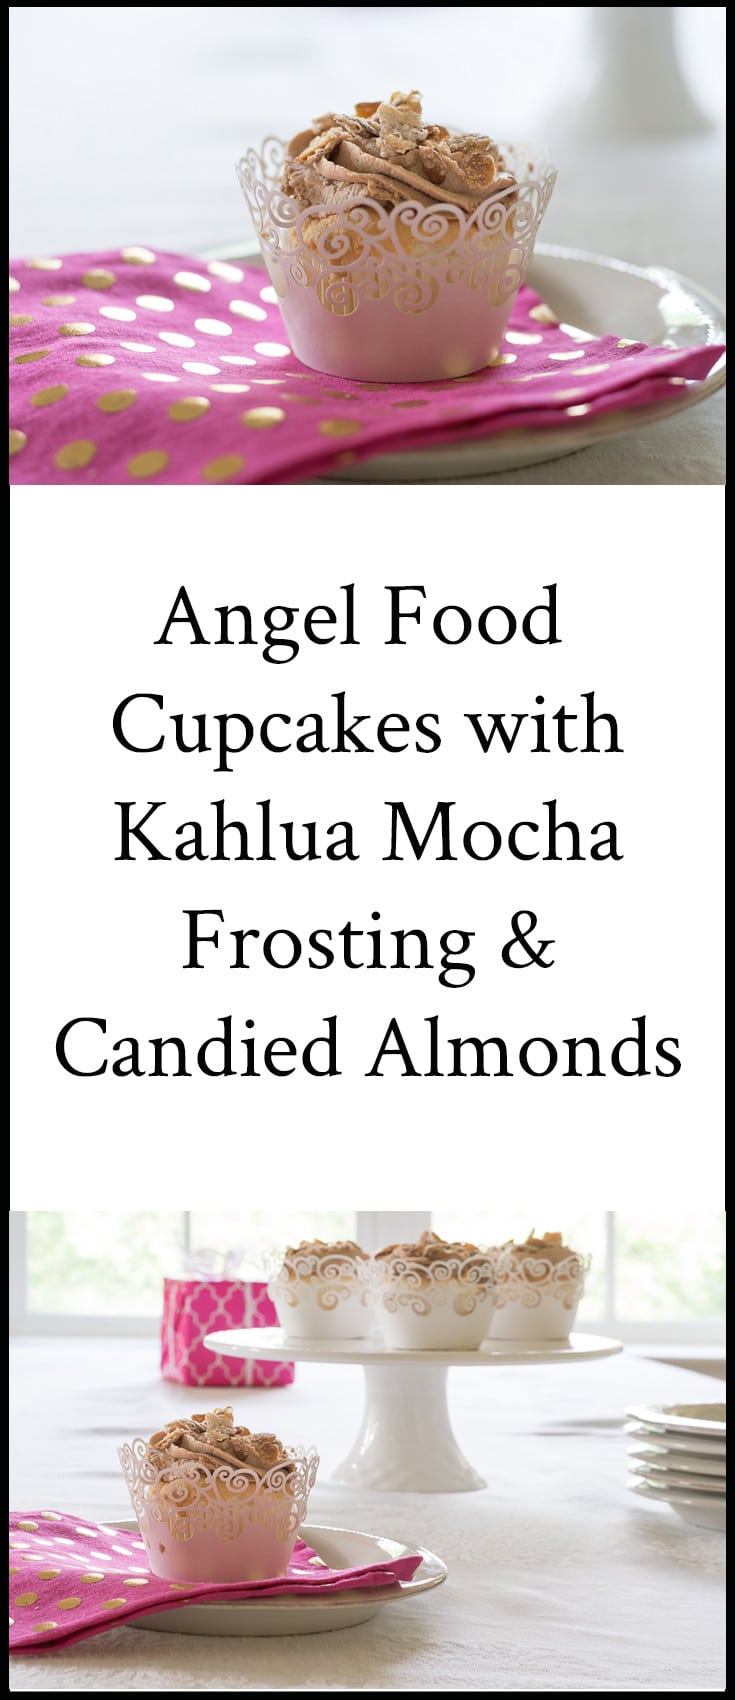 Do you love Angel Food Cake but not the hassle of making it? Well these Angel Food Cupcakes wit Kahlua Mocha Frosting and Candied Almonds are the dessert recipe you need. Perfect for entertaining or for everyday treats.